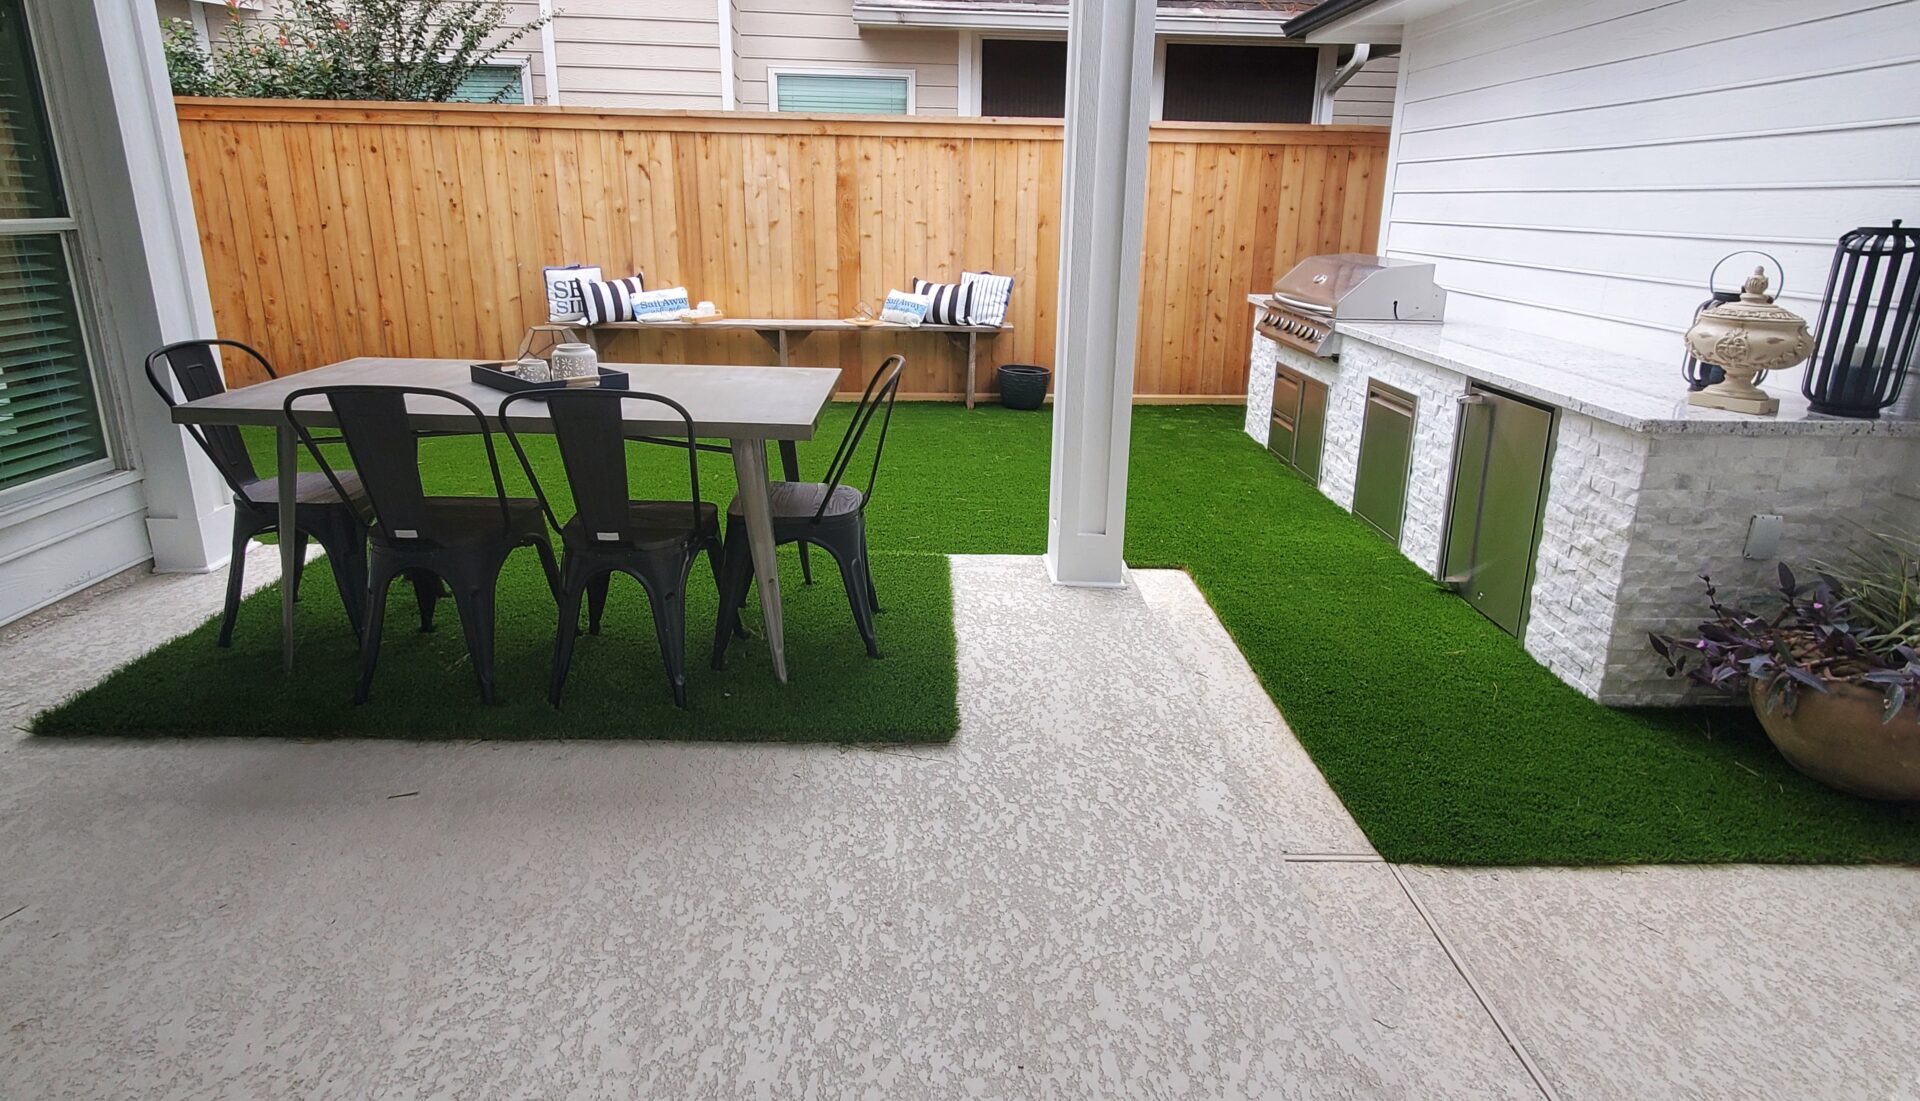 A turf design for a grilling area